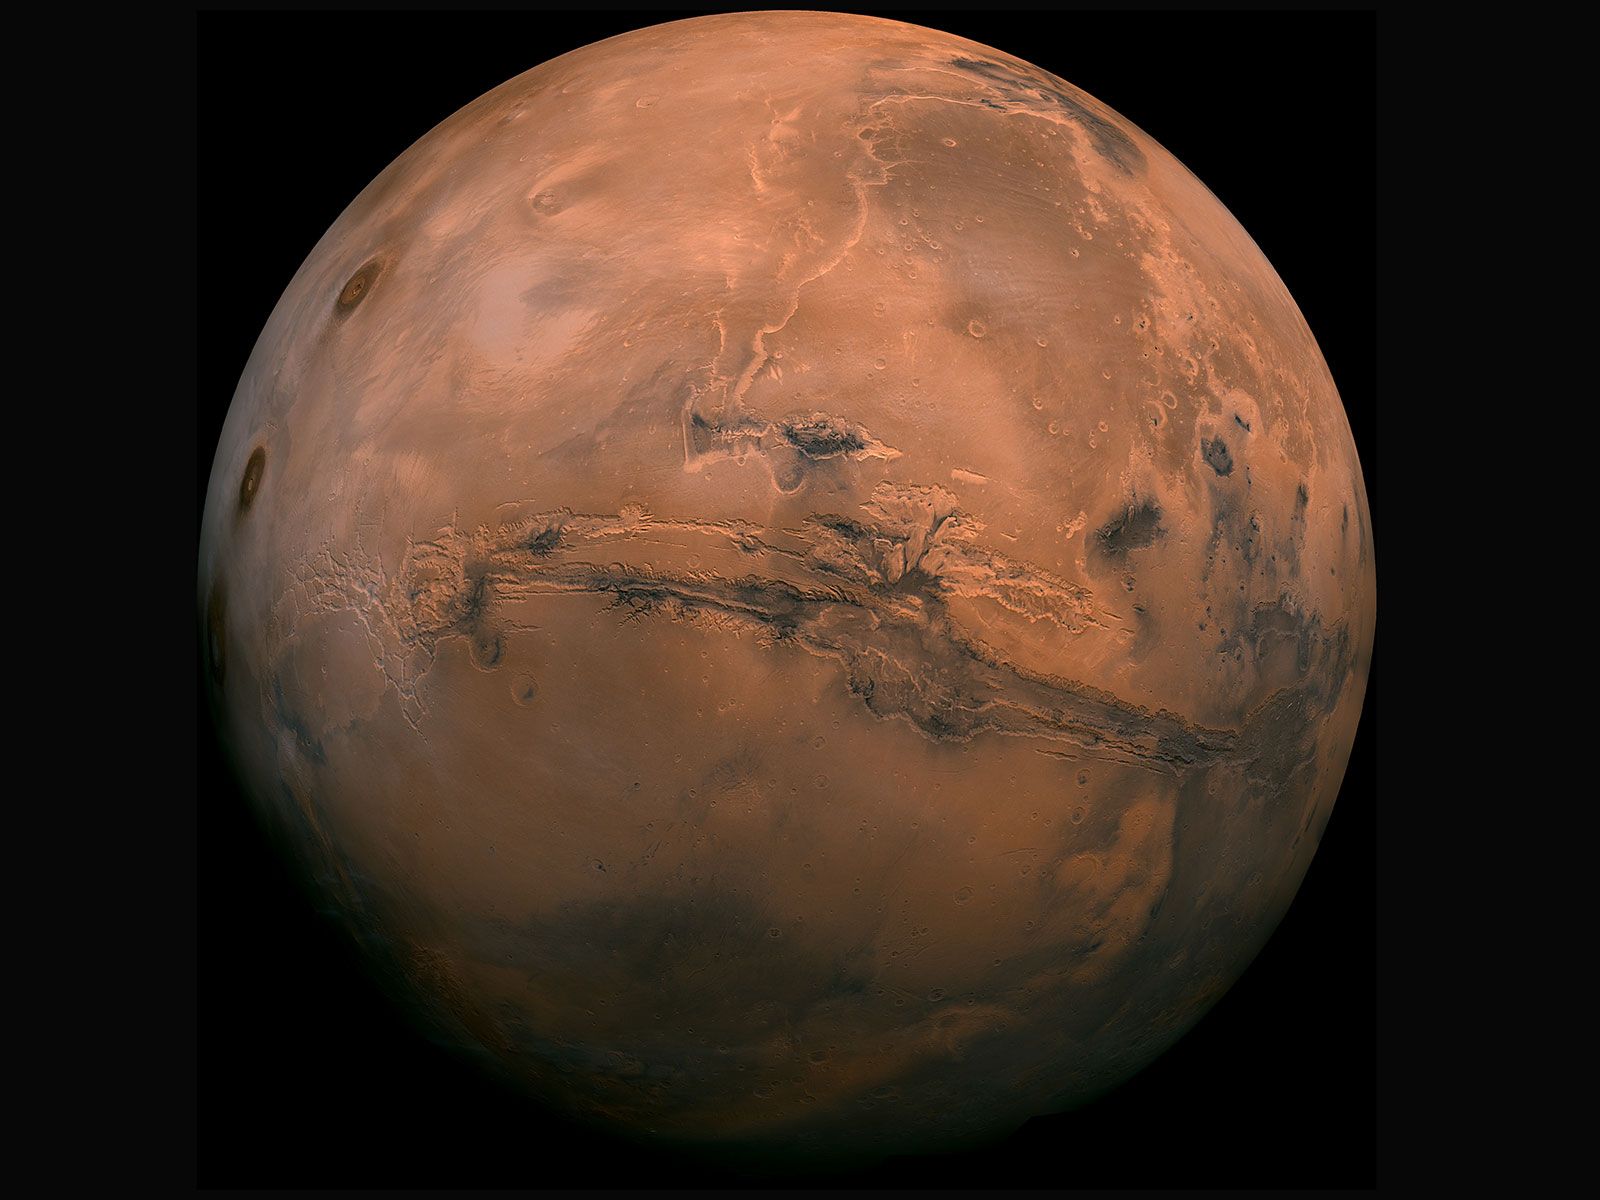 20 Years of Mars Express Images Helped Build This Mosaic of the Red Planet  - Universe Today